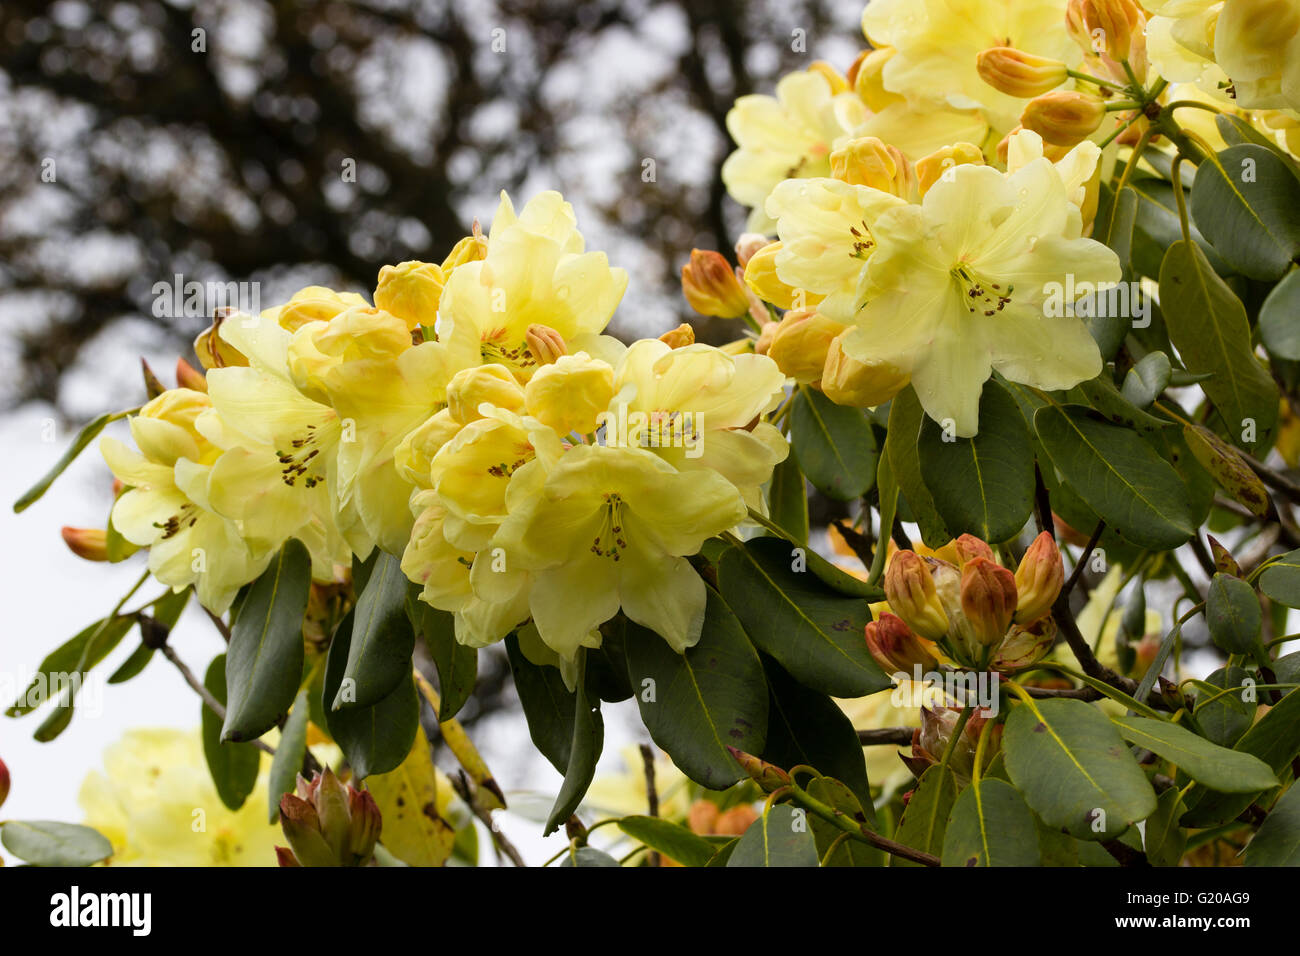 Lemon yellow May flowers of the large leaved evergreen Rhododendron 'Queen Elizabeth II' Stock Photo